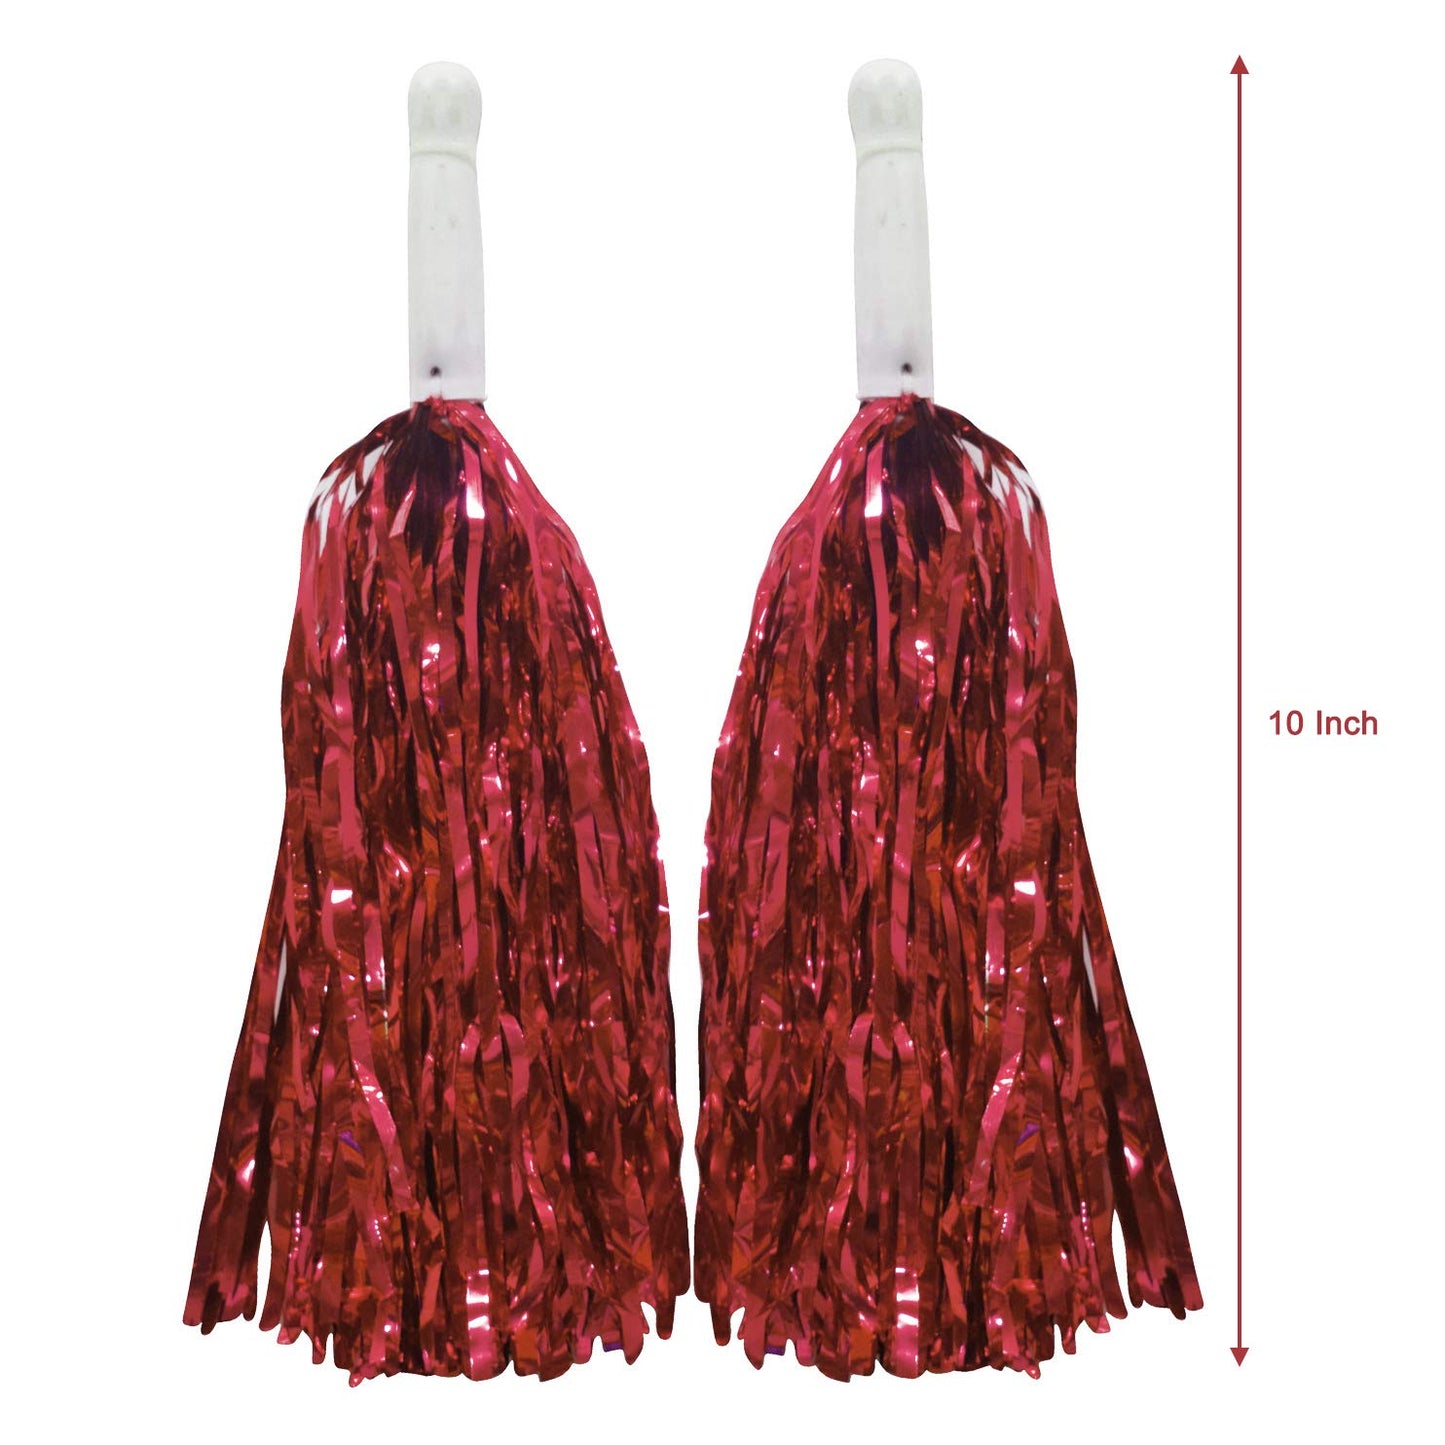 Pom Poms for Cheerleading Pack of 2 Pieces